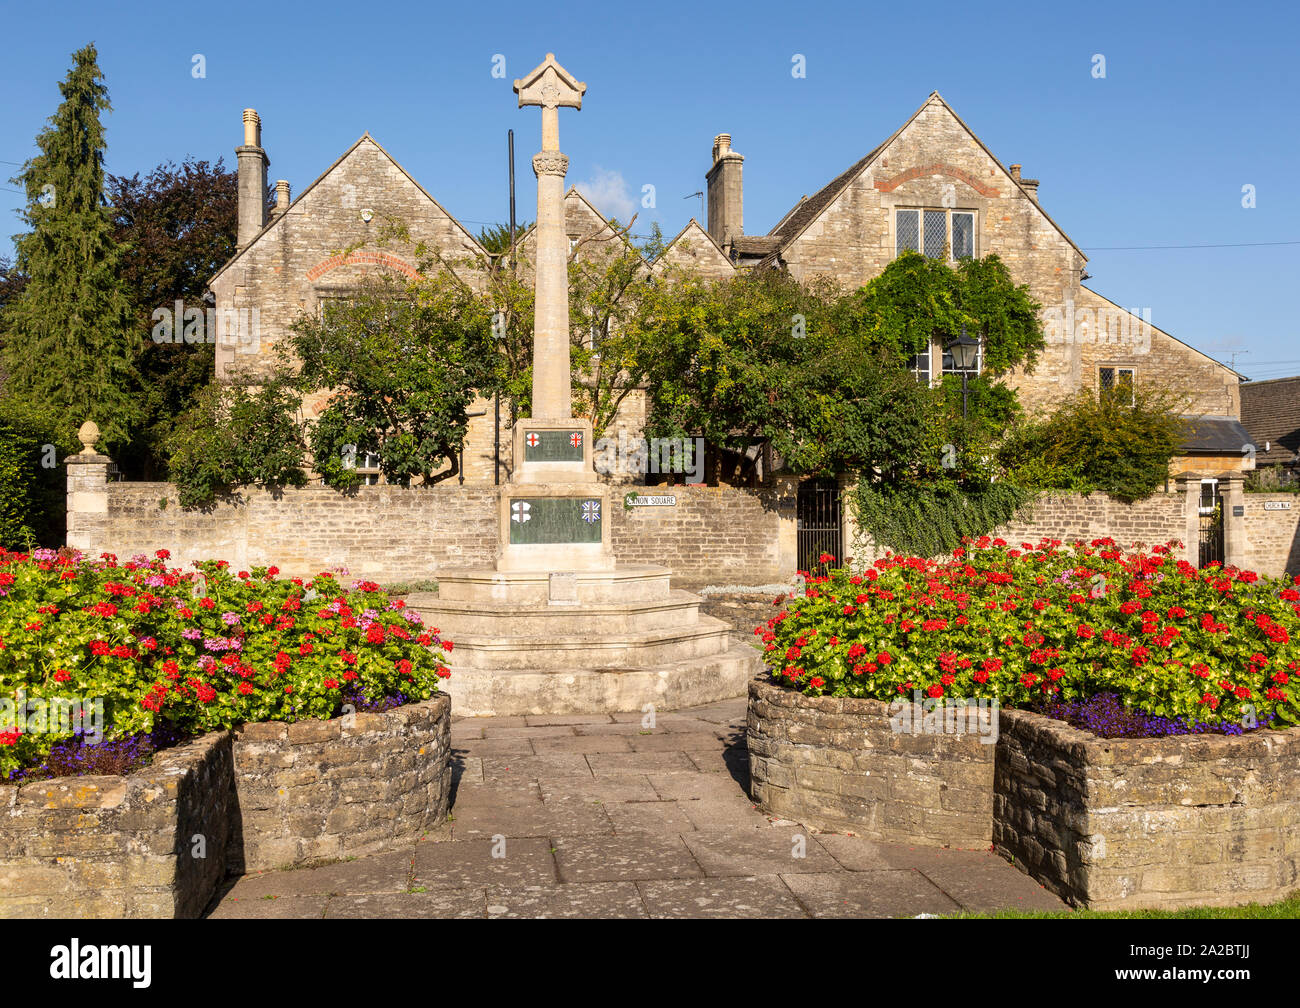 Historic Cotswold Stone Buildings And War Memorial In Canon Square Melksham Wiltshire England Uk Stock Photo Alamy